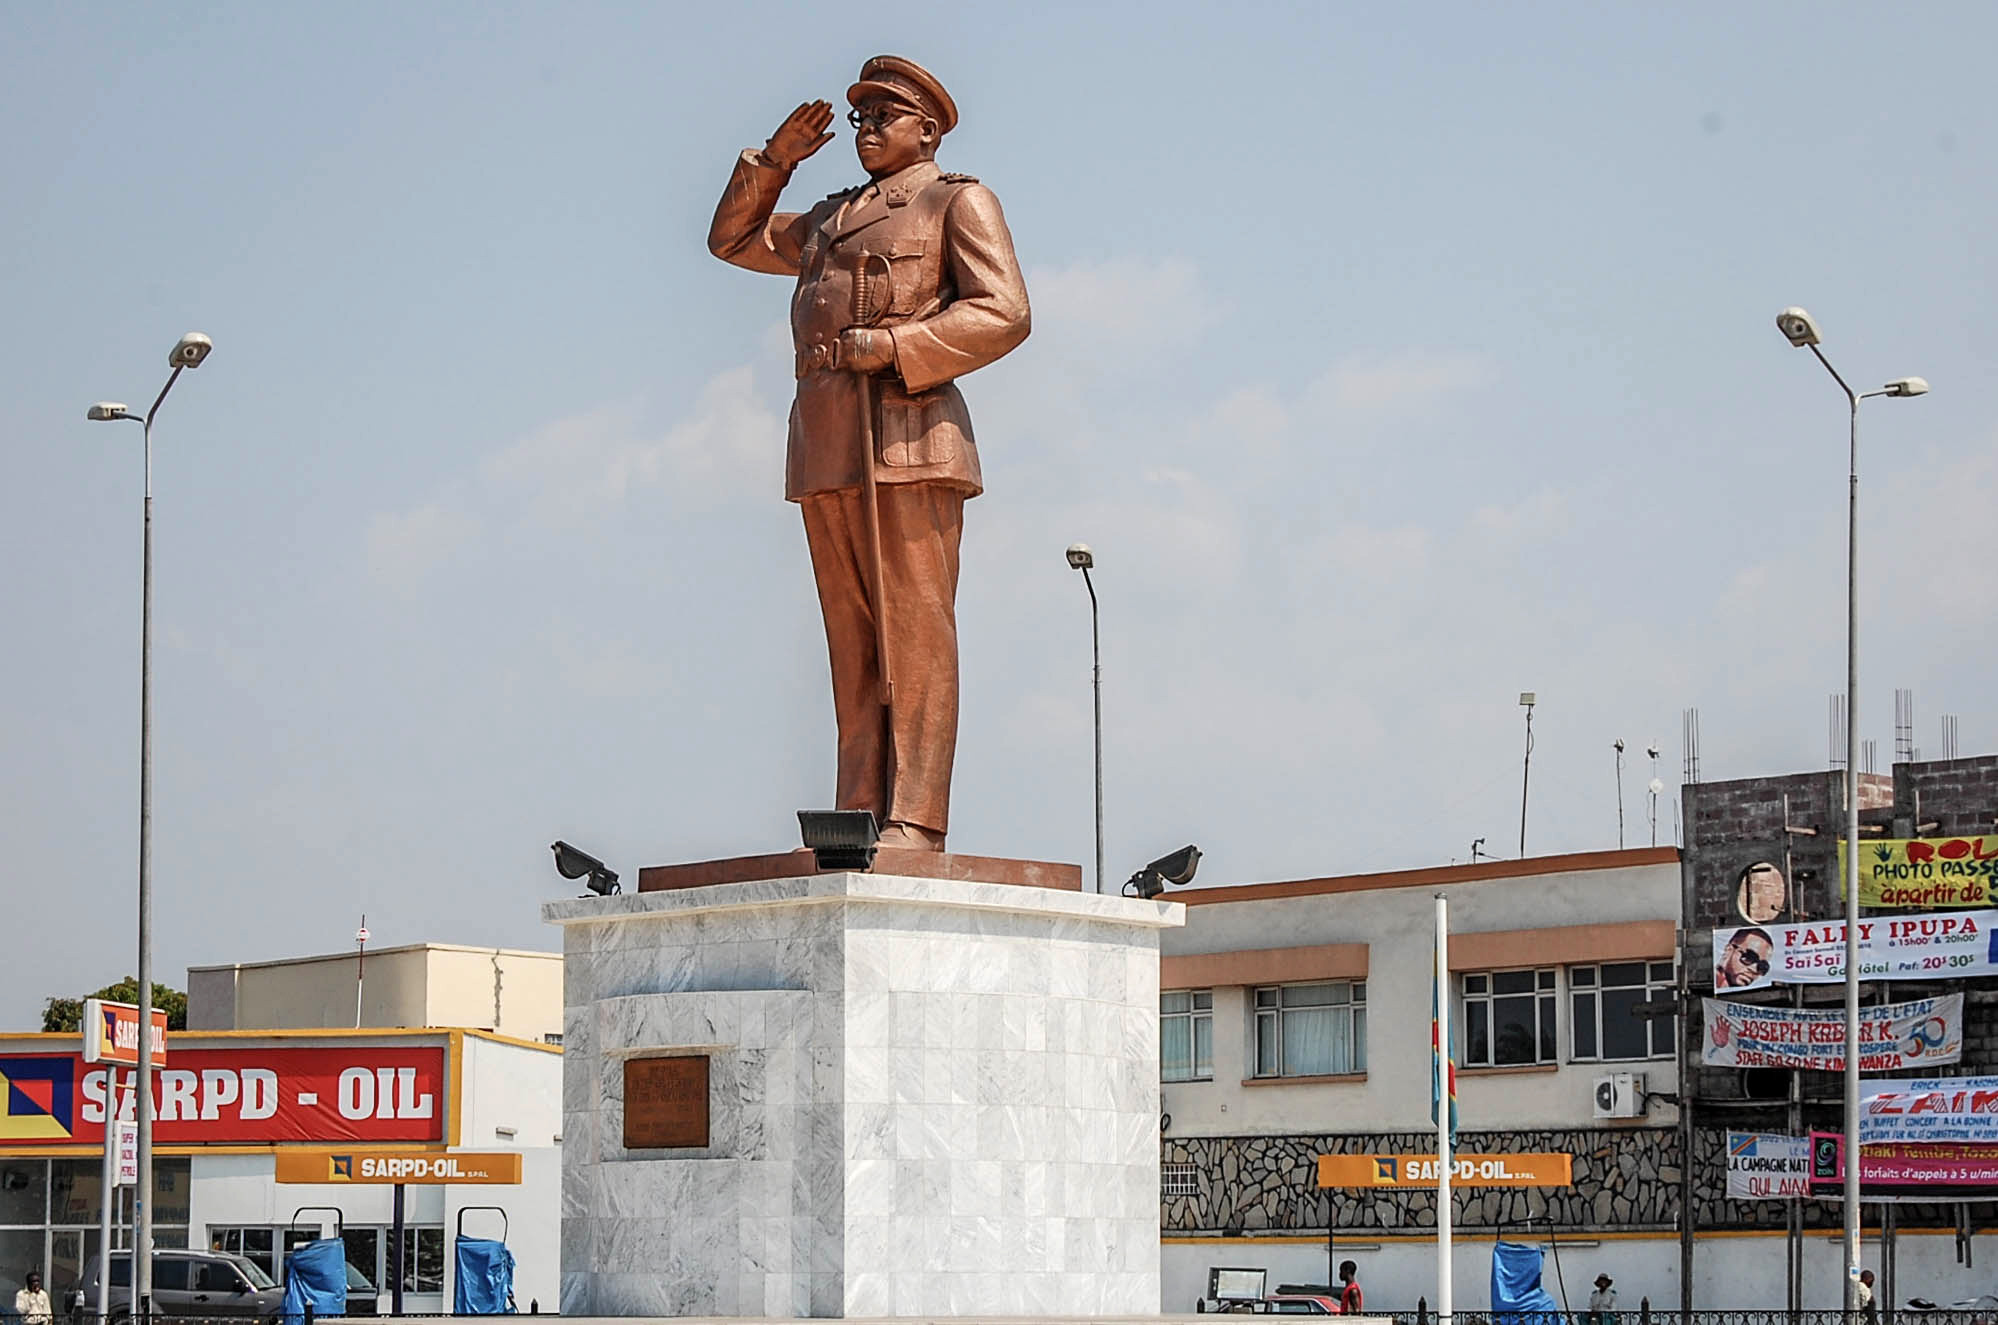 Kinshasa, Democratic Republic of Congo, 2010. A statue of Joseph Kasa-Vubu, Congo’s first president who served from 1960-1965, which was installed for the 50th anniversary of independence in 2010 at the emblematic Kimpwanza roundabout where Congo celebrated Independence from Belgium on June 30th, 1960. © From the personal archives of Justin Makangara for Fondation Carmignac